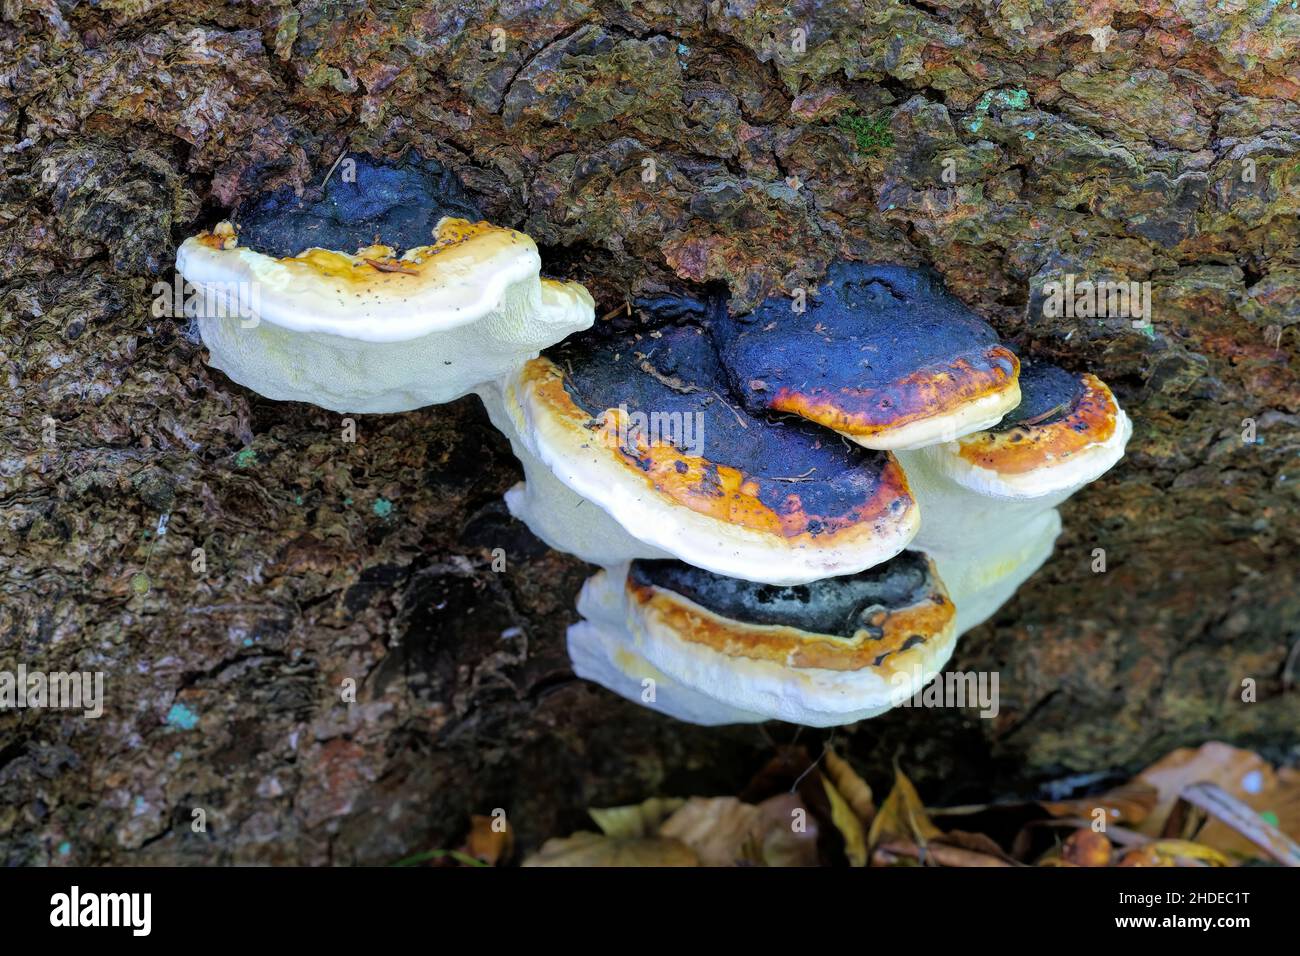 red belt conk or Fomitopsis pinicola in autumn forest Stock Photo